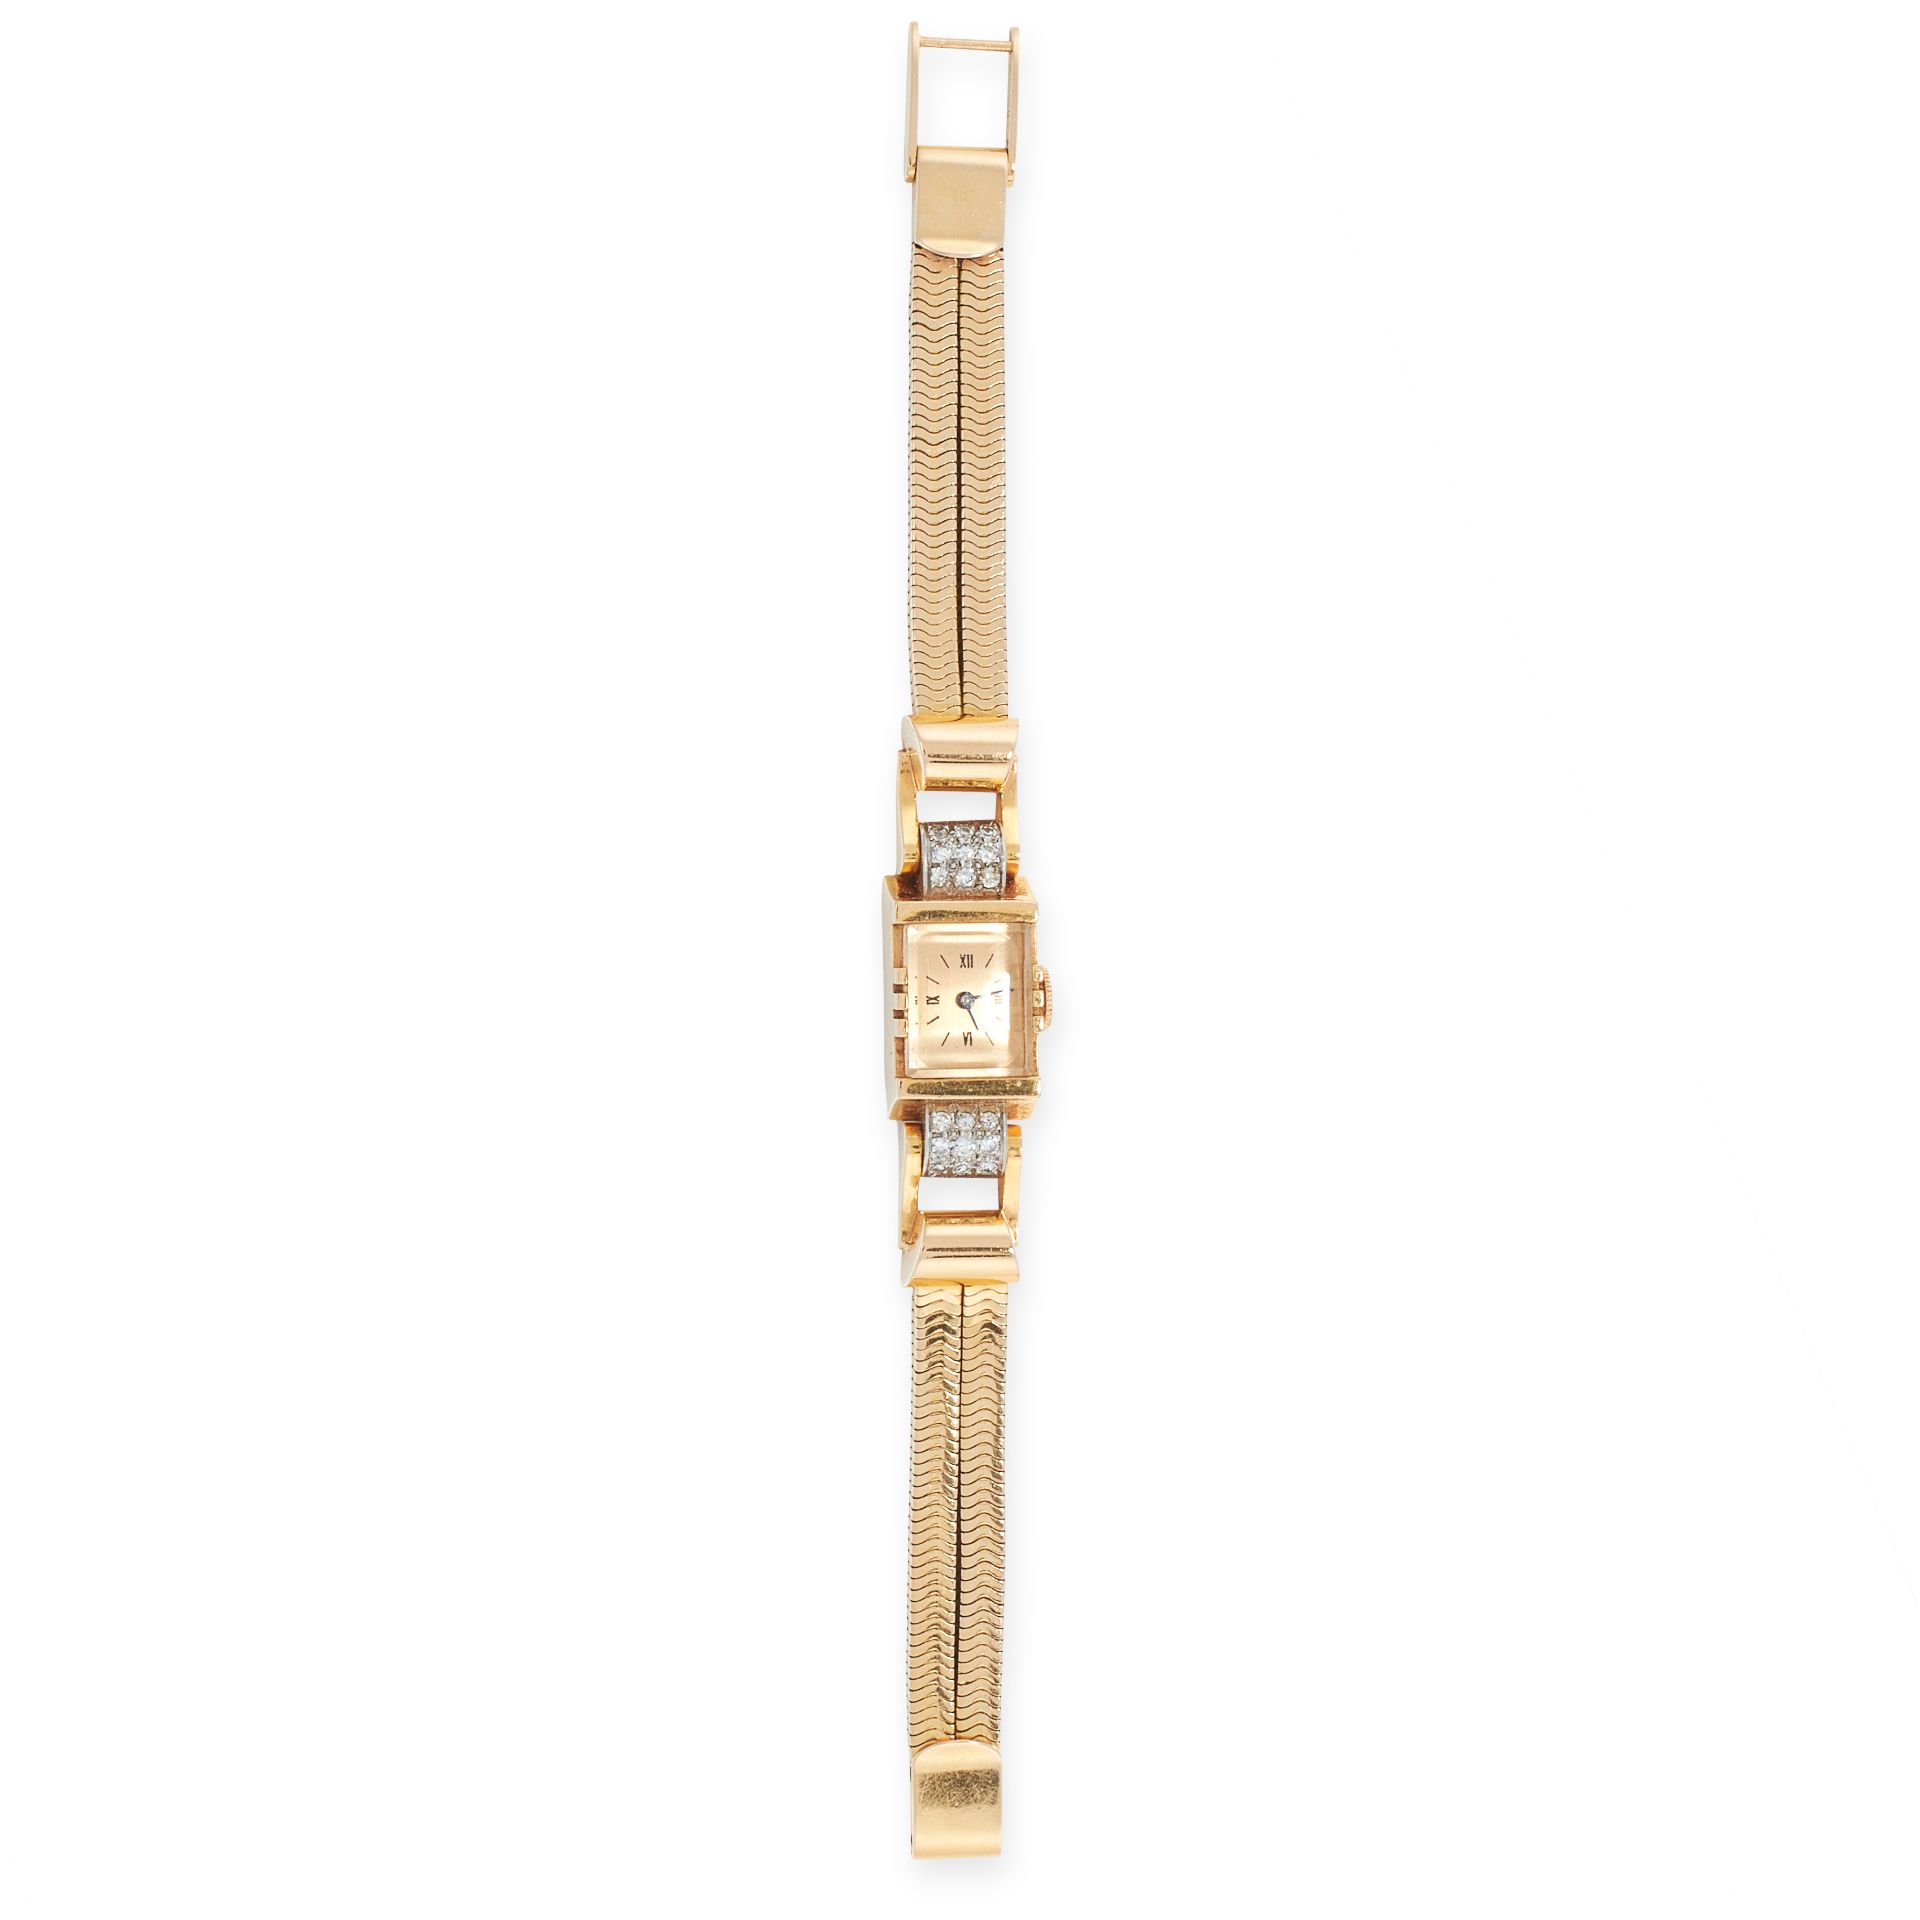 A VINTAGE DIAMOND COCKTAIL WATCH in 18ct yellow gold, the rectangular face accented by scrolls set